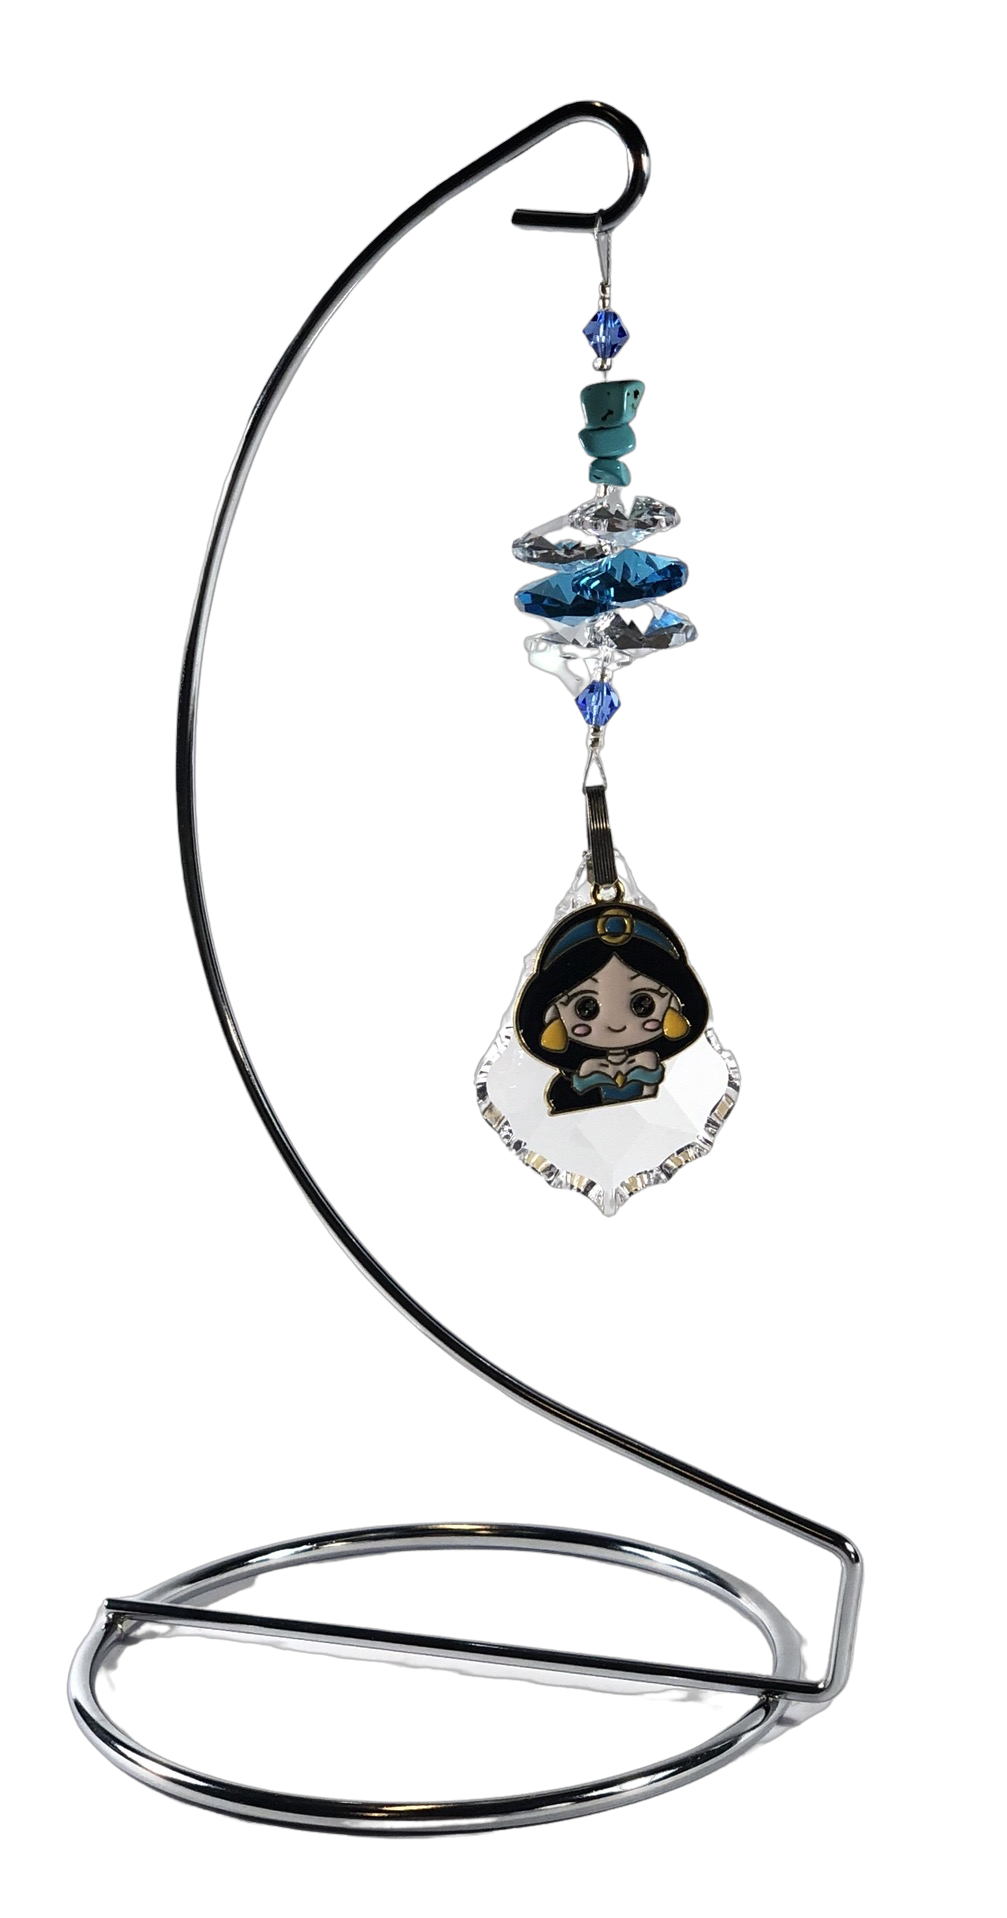 Aladdin - Jasmine crystal suncatcher is decorated with turquoise gemstones and come on this amazing stand.